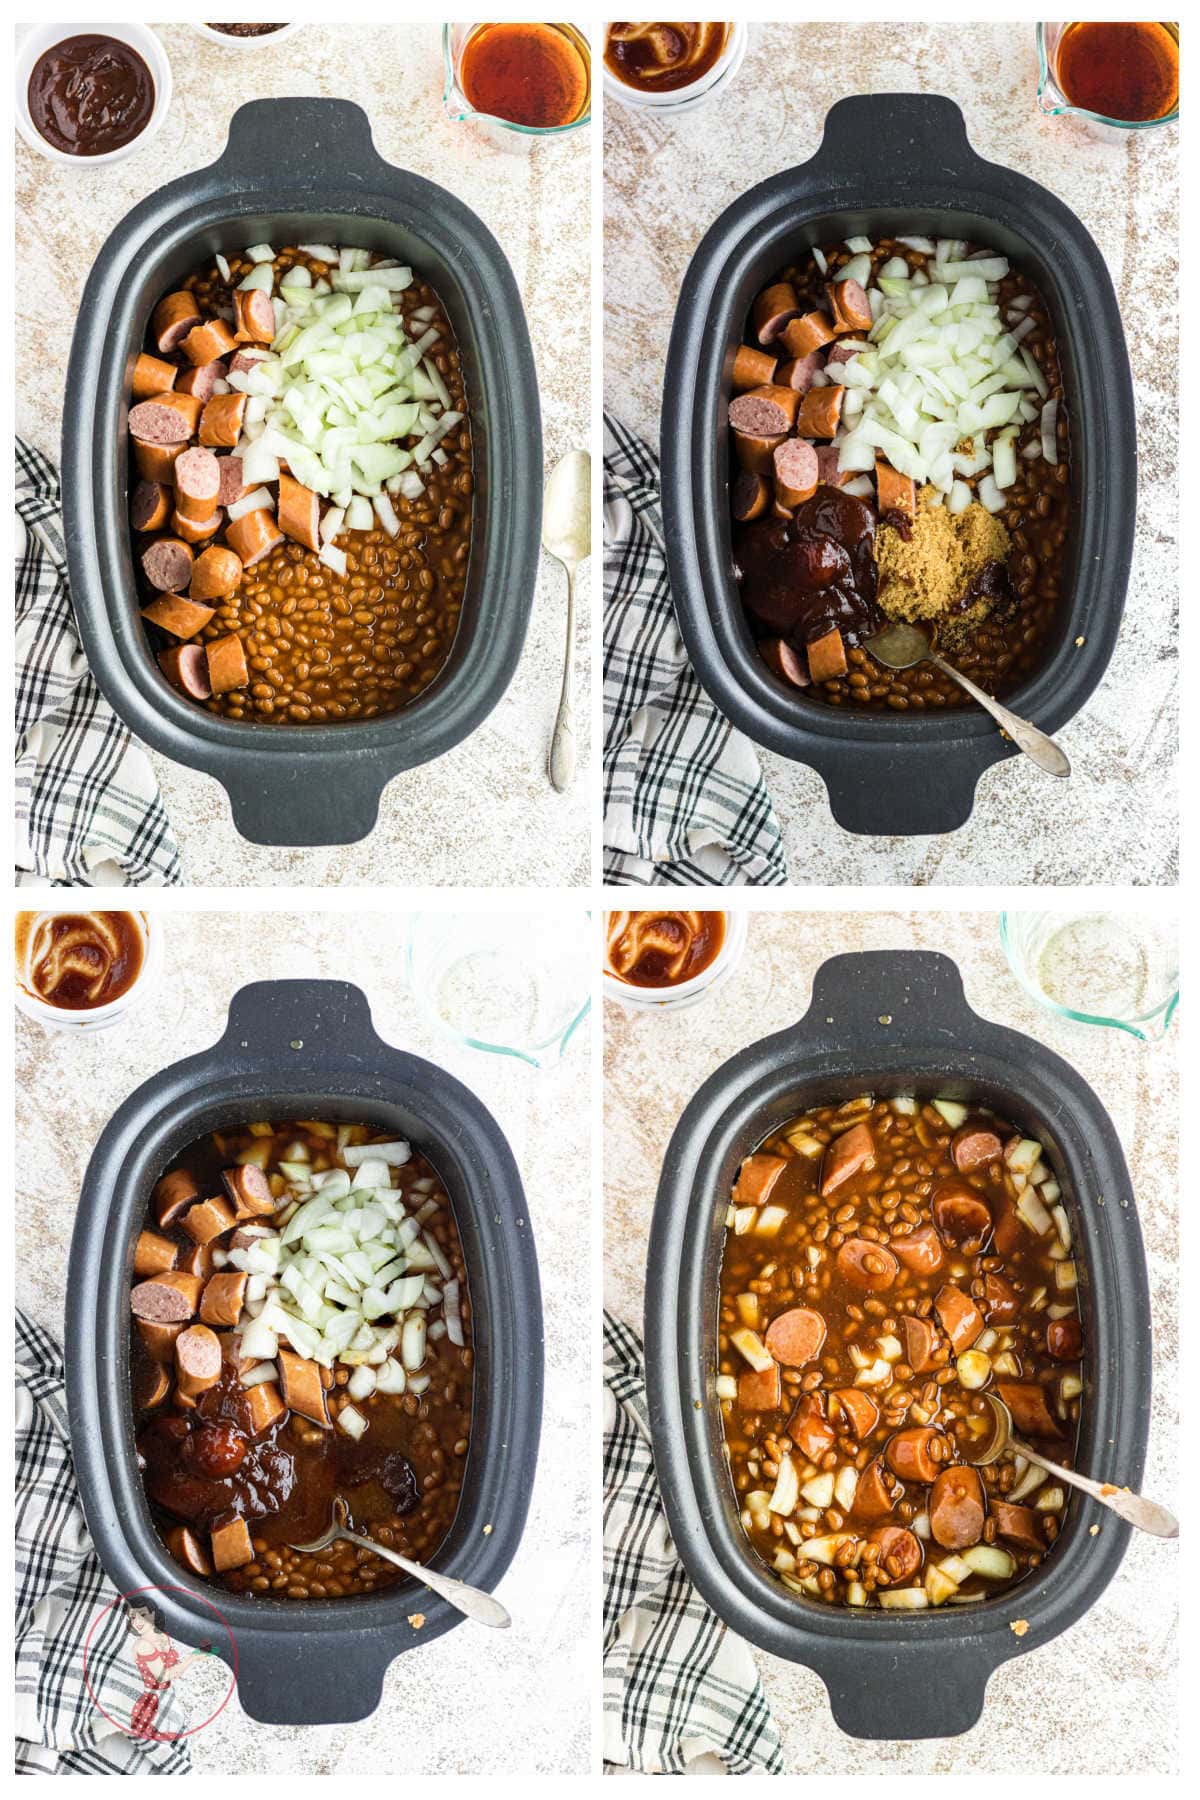 Step by step images showing how to make baked beans and kielbasa in the slow cooker.